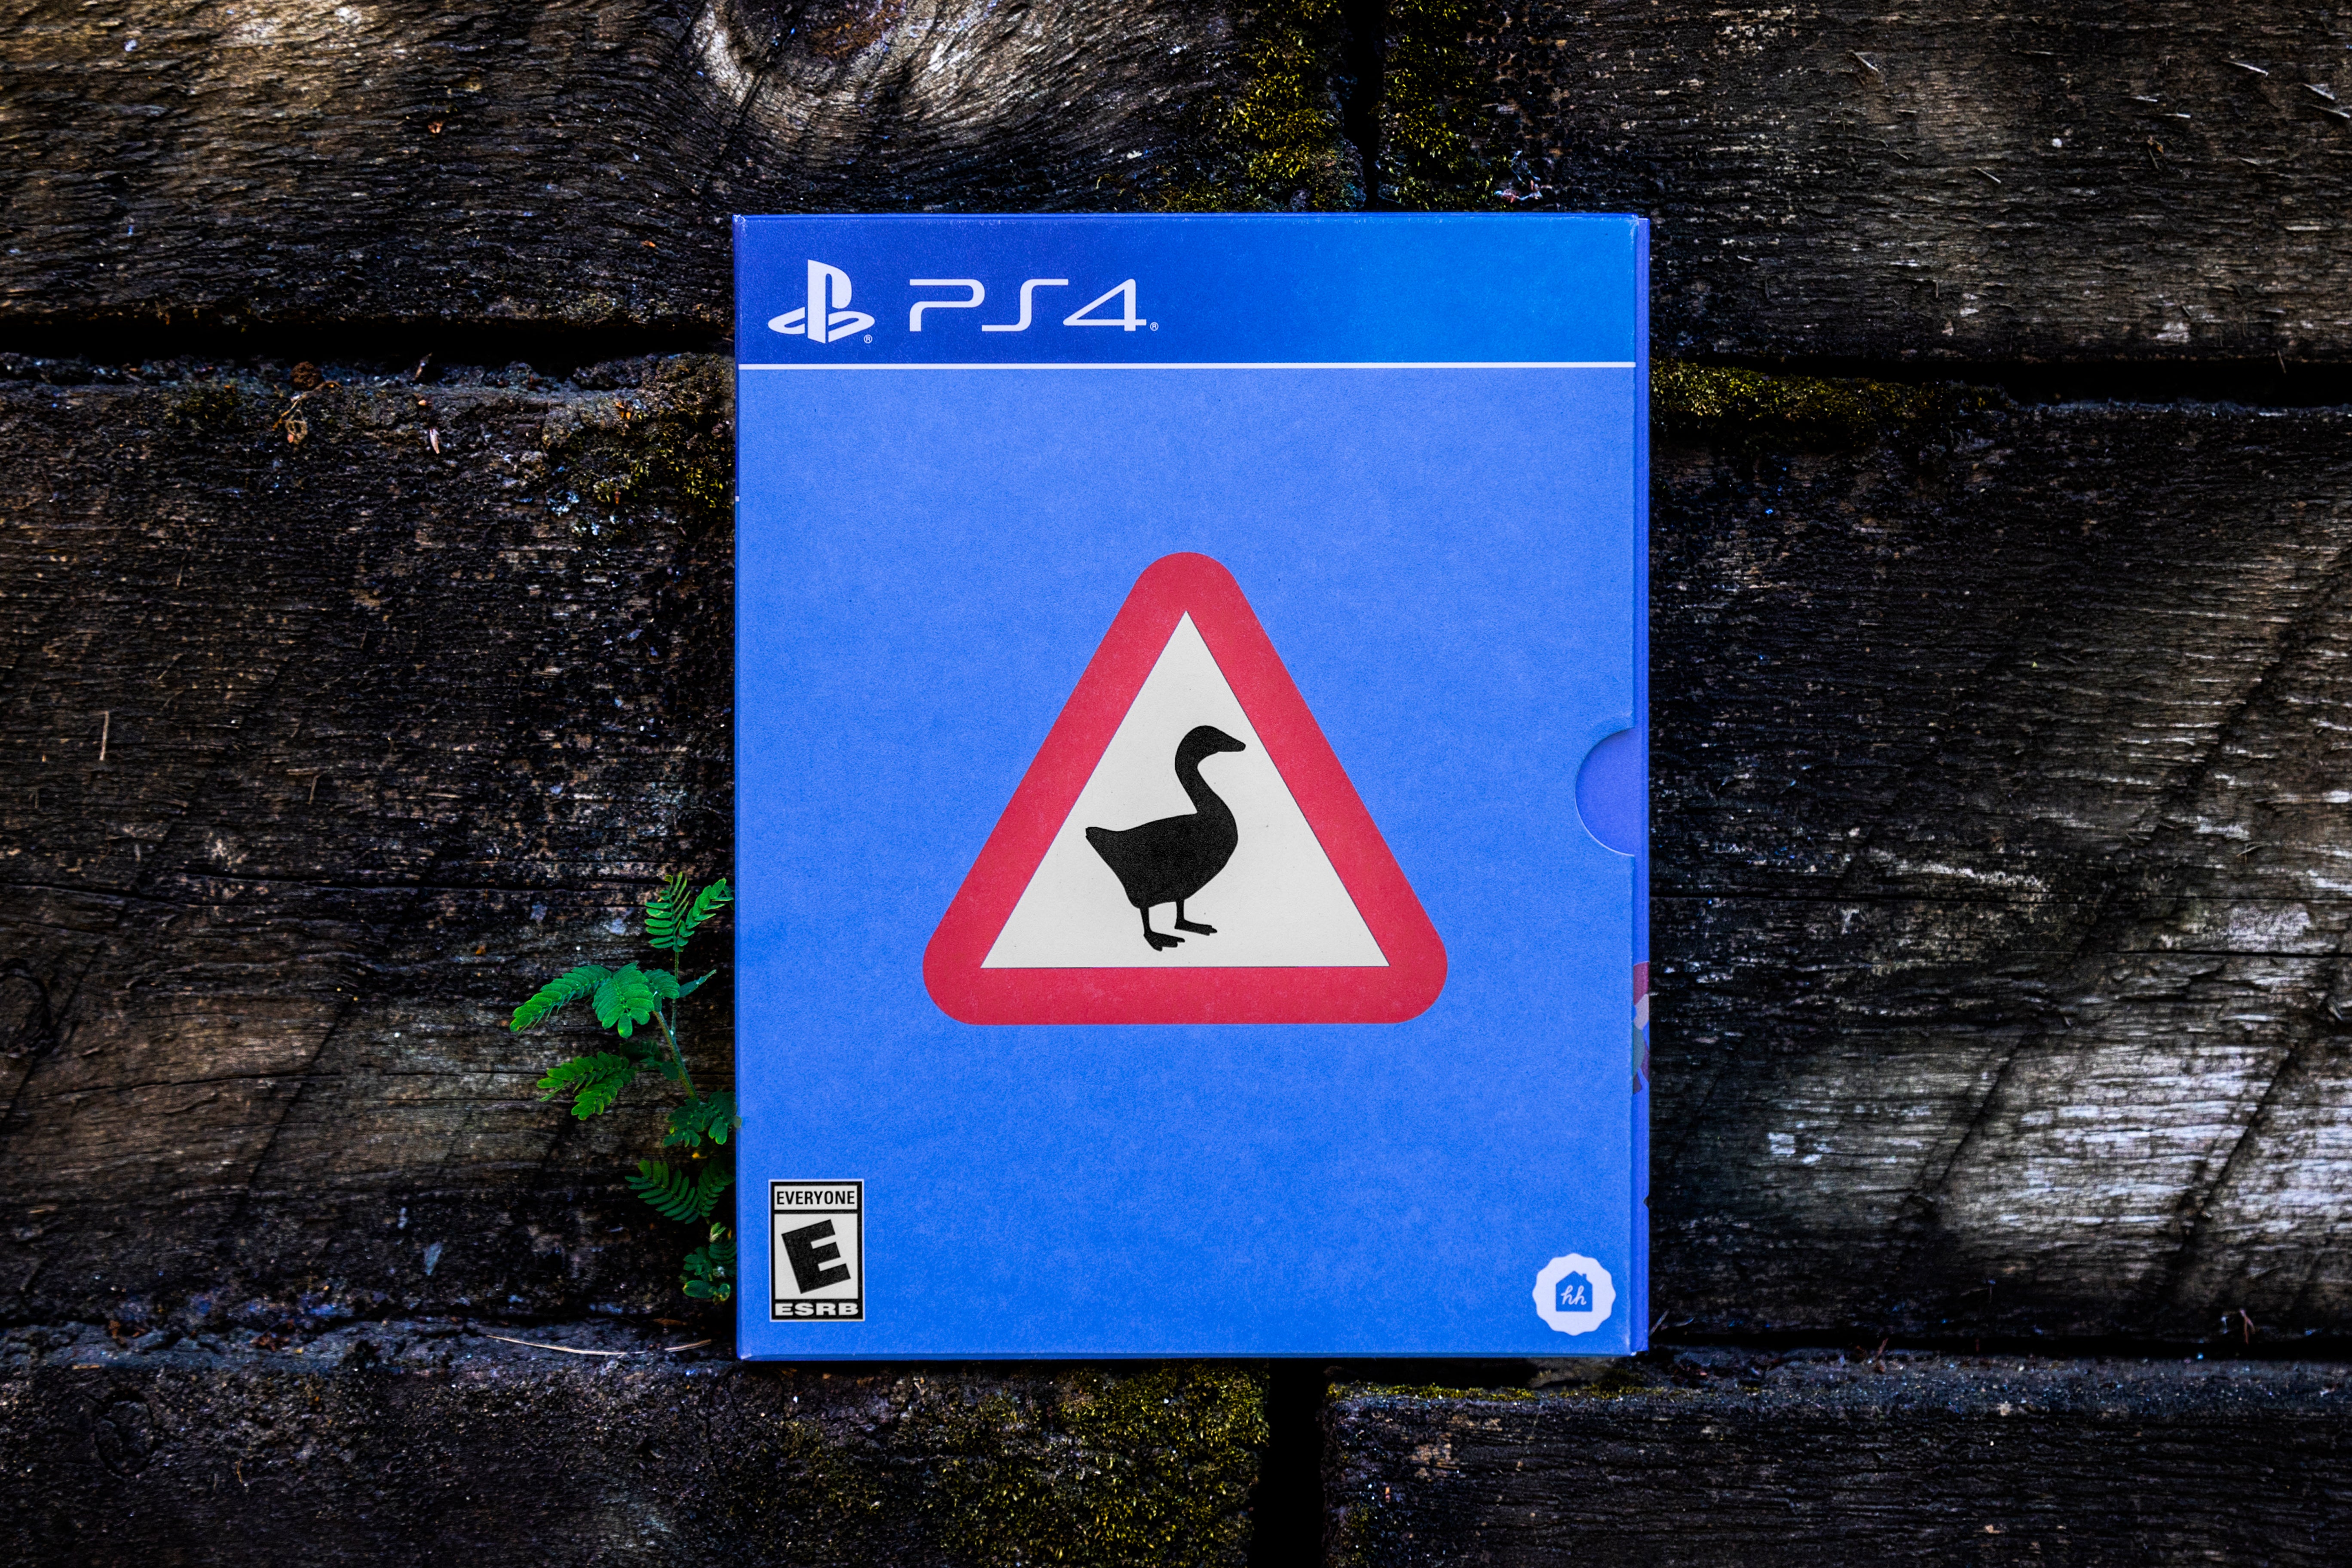 Untitled Goose Game - “Lovely Edition” (PlayStation 4)